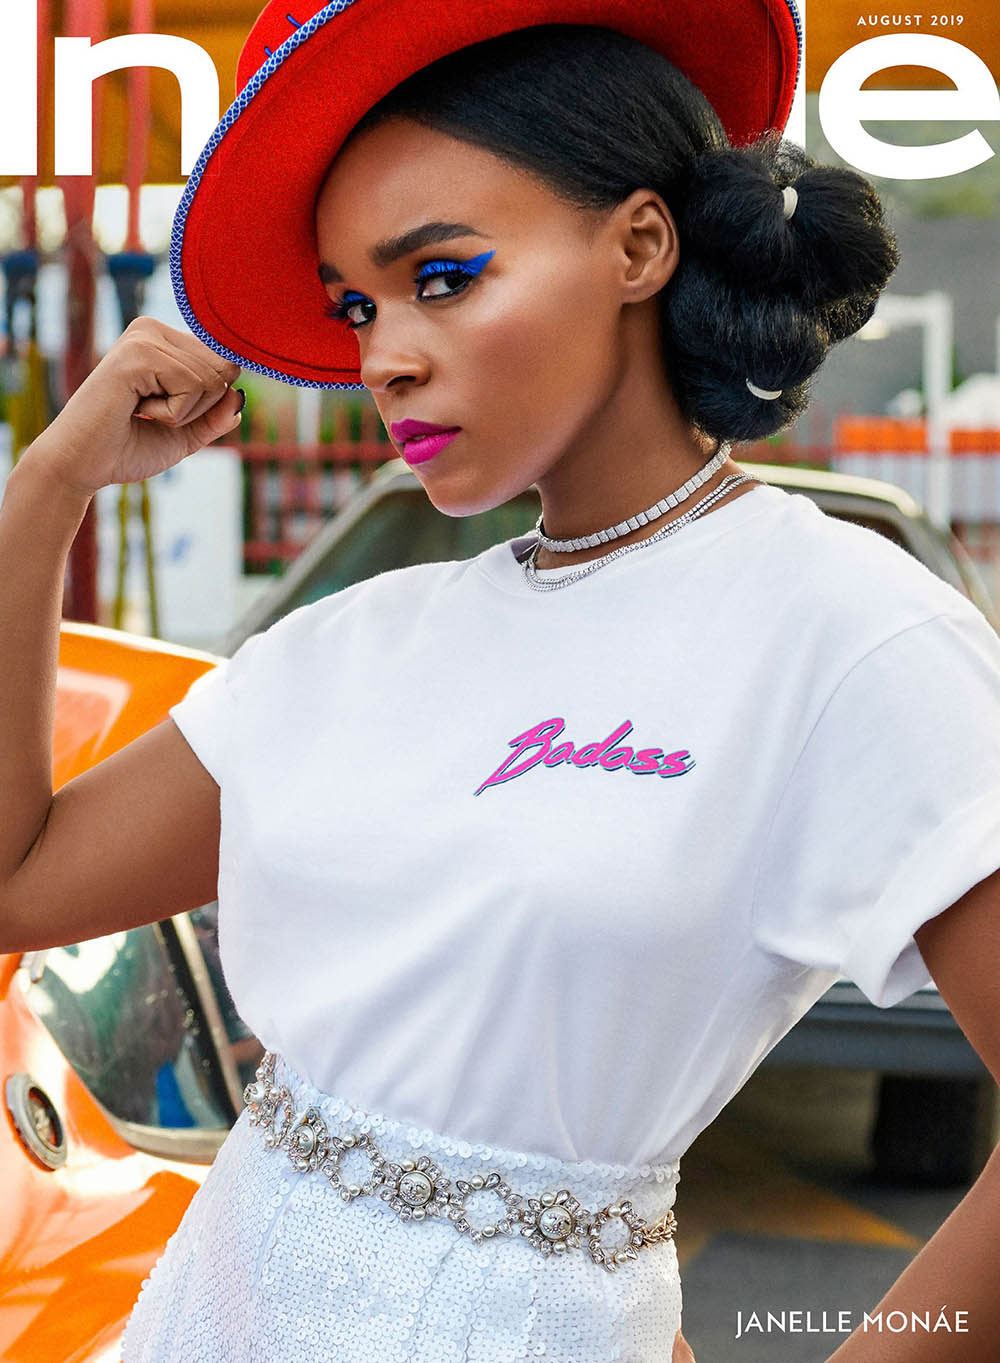 Janelle Monáe covers InStyle US August 2019 by Pamela Hanson